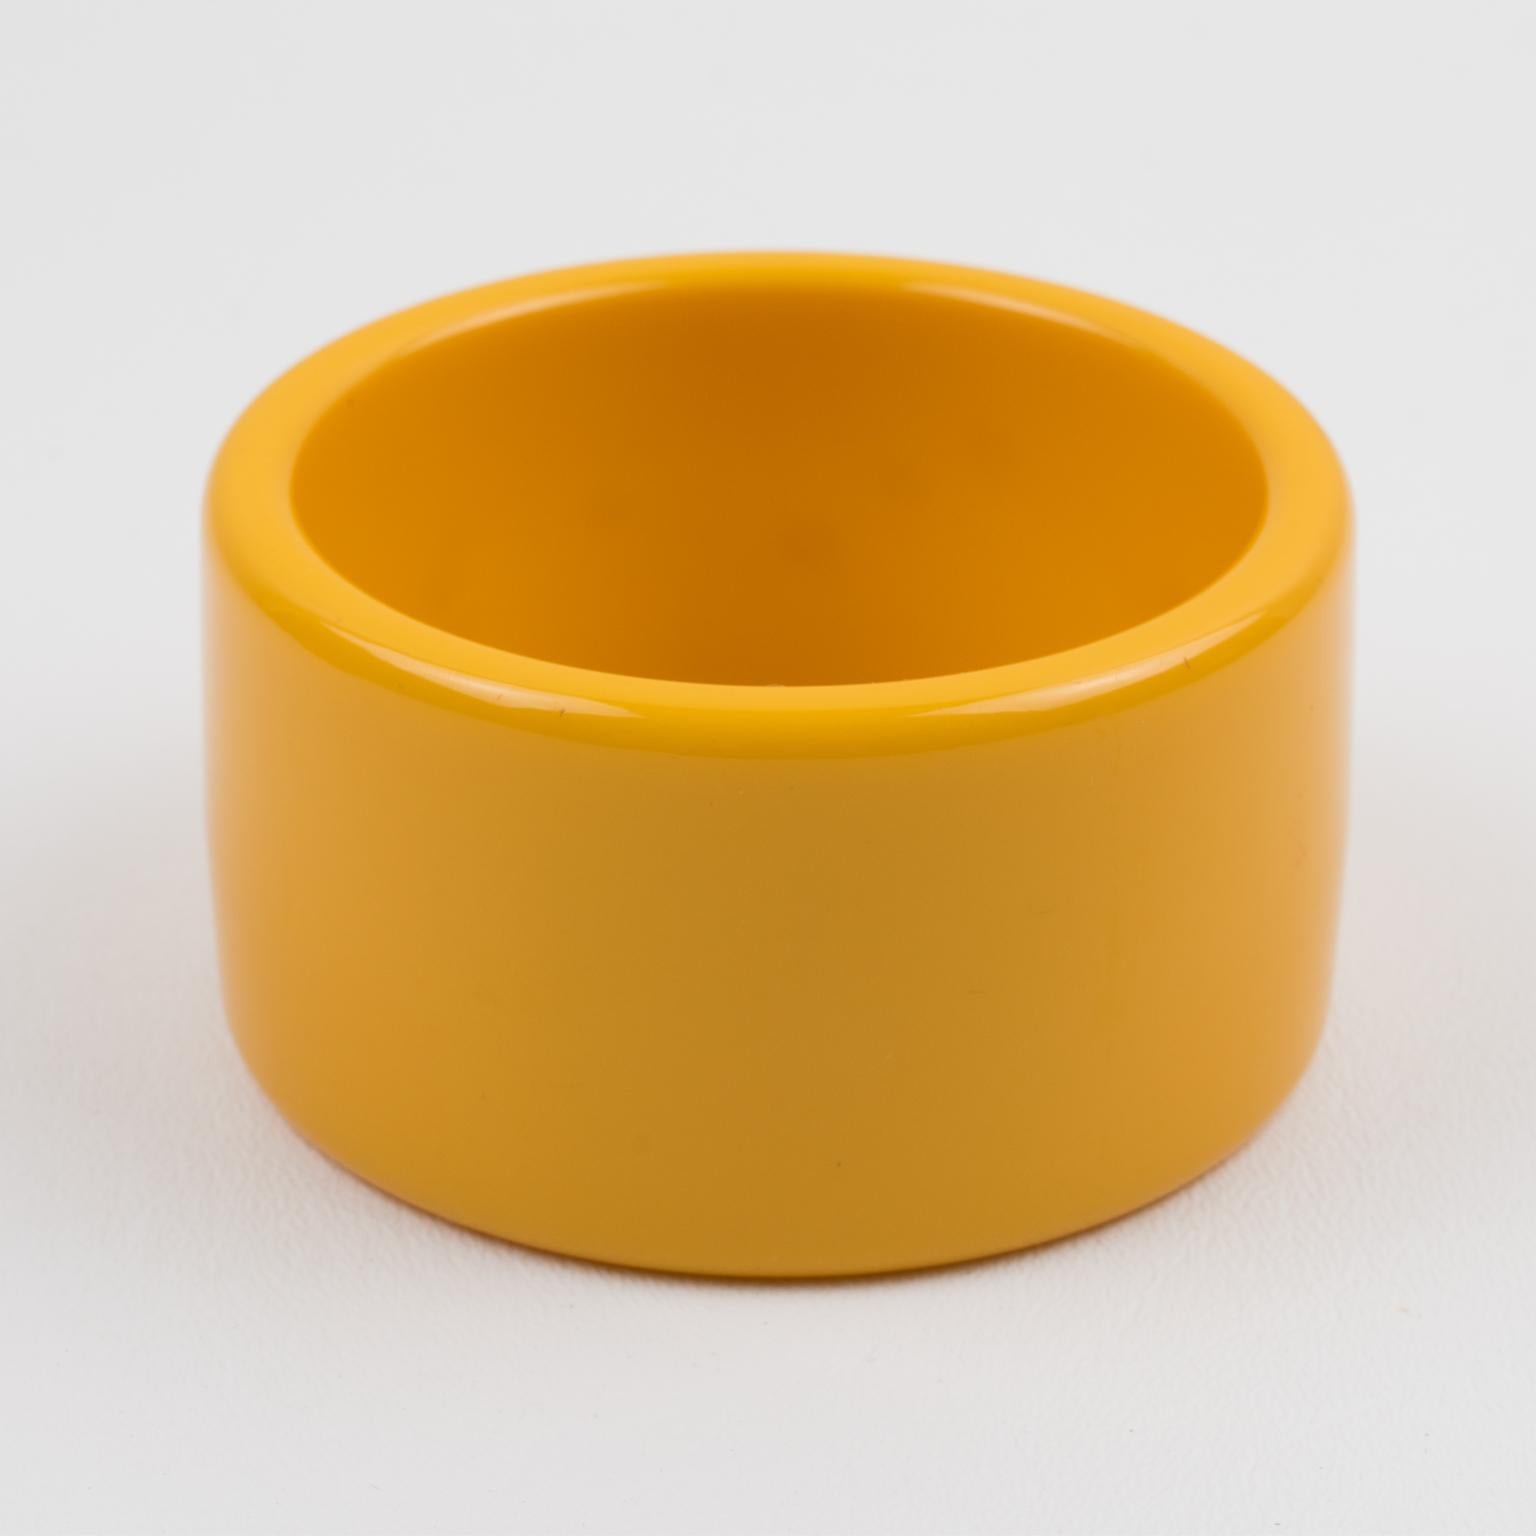 This is a great-looking yellow creamed corn Bakelite bracelet bangle. The piece boasts an oversized wide sliced shape with an intense bright plain yellow color.
Measurements: Inside across is 2.63 in. diameter (6.7 cm) - outside across is 3.19 in.